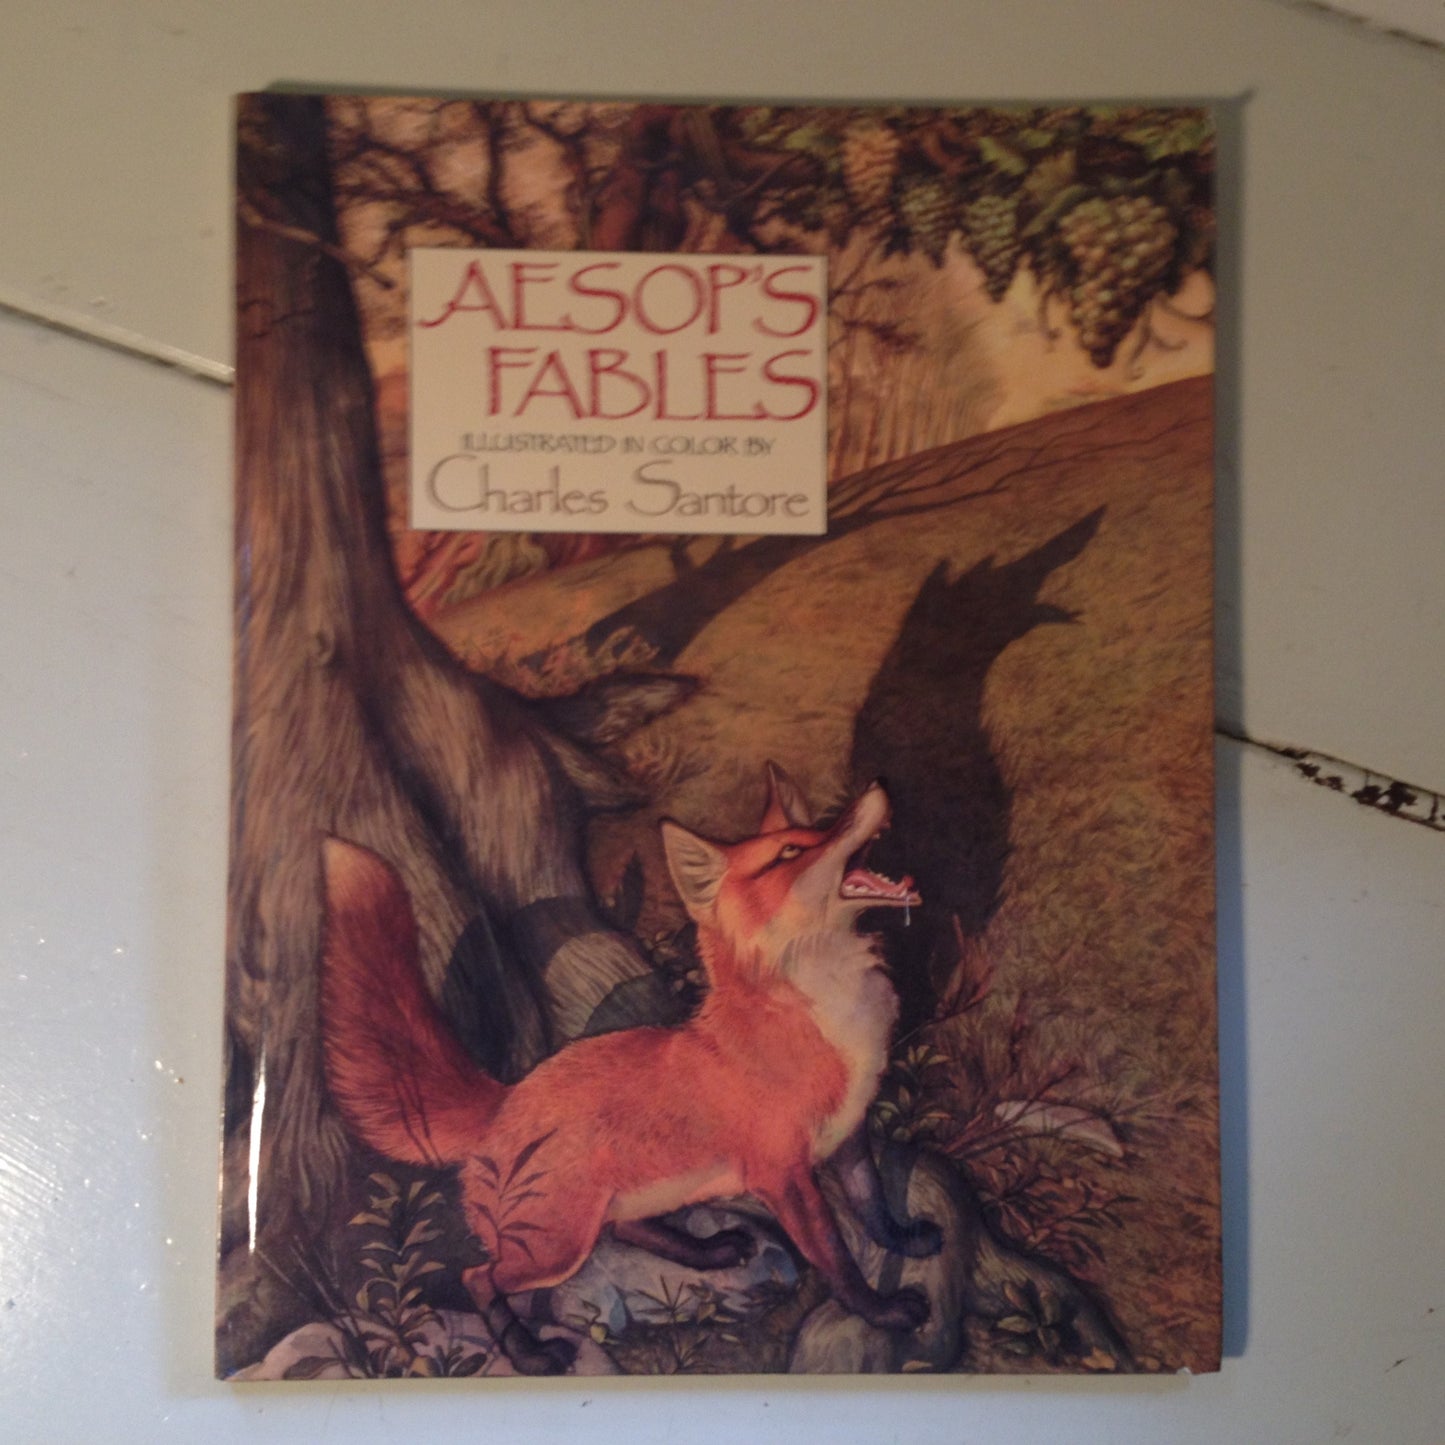 Aesop's Fables Illustrated in Color By Charles Santore